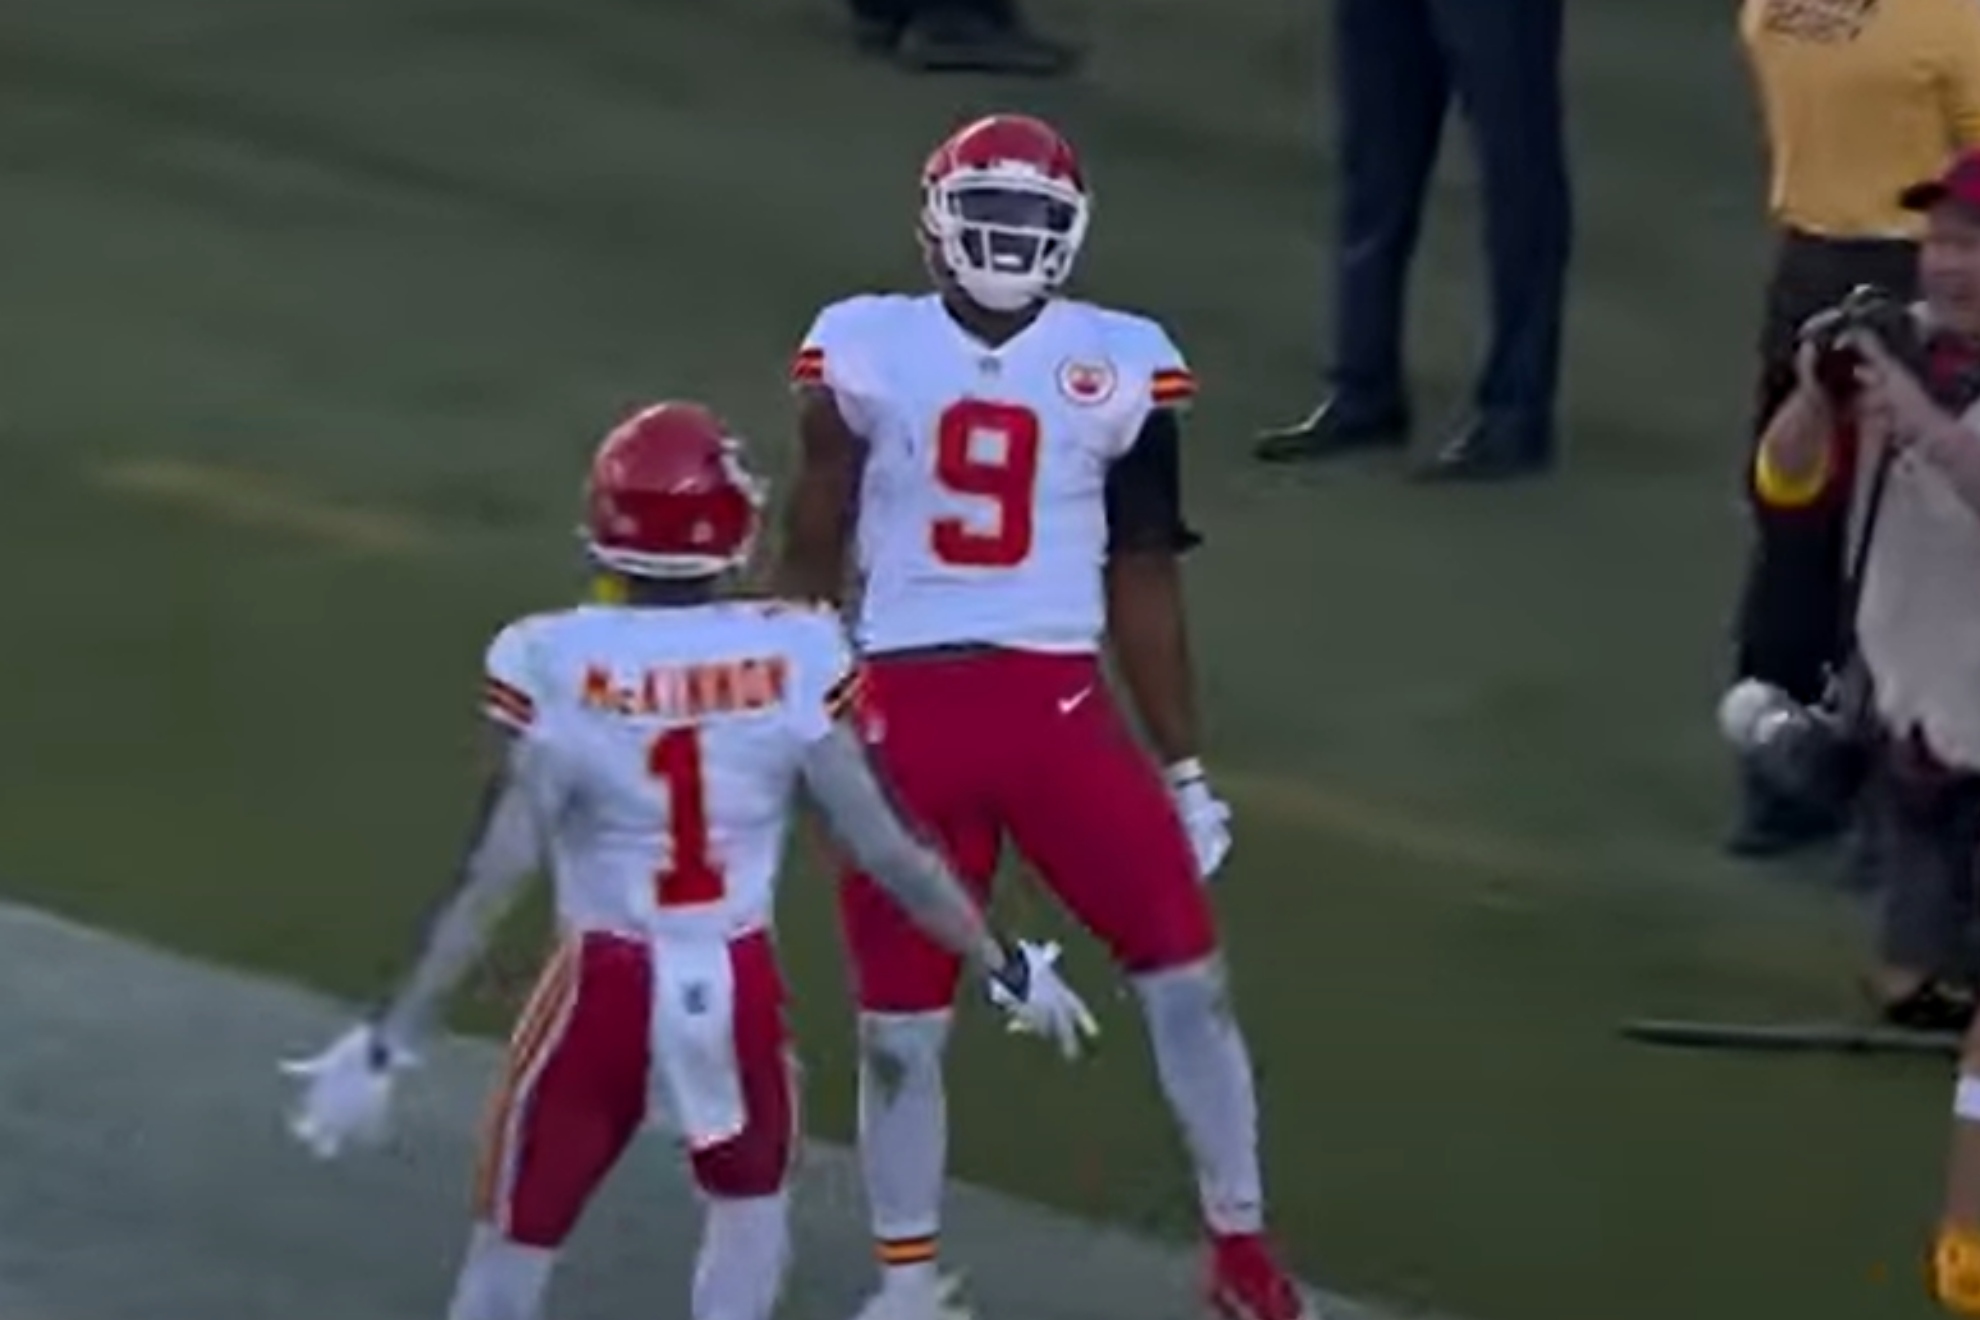 Juju Smith-Schuster pays homage to Cristiano Ronaldo on the field after scoring a 32-yard touchdown vs 49ers